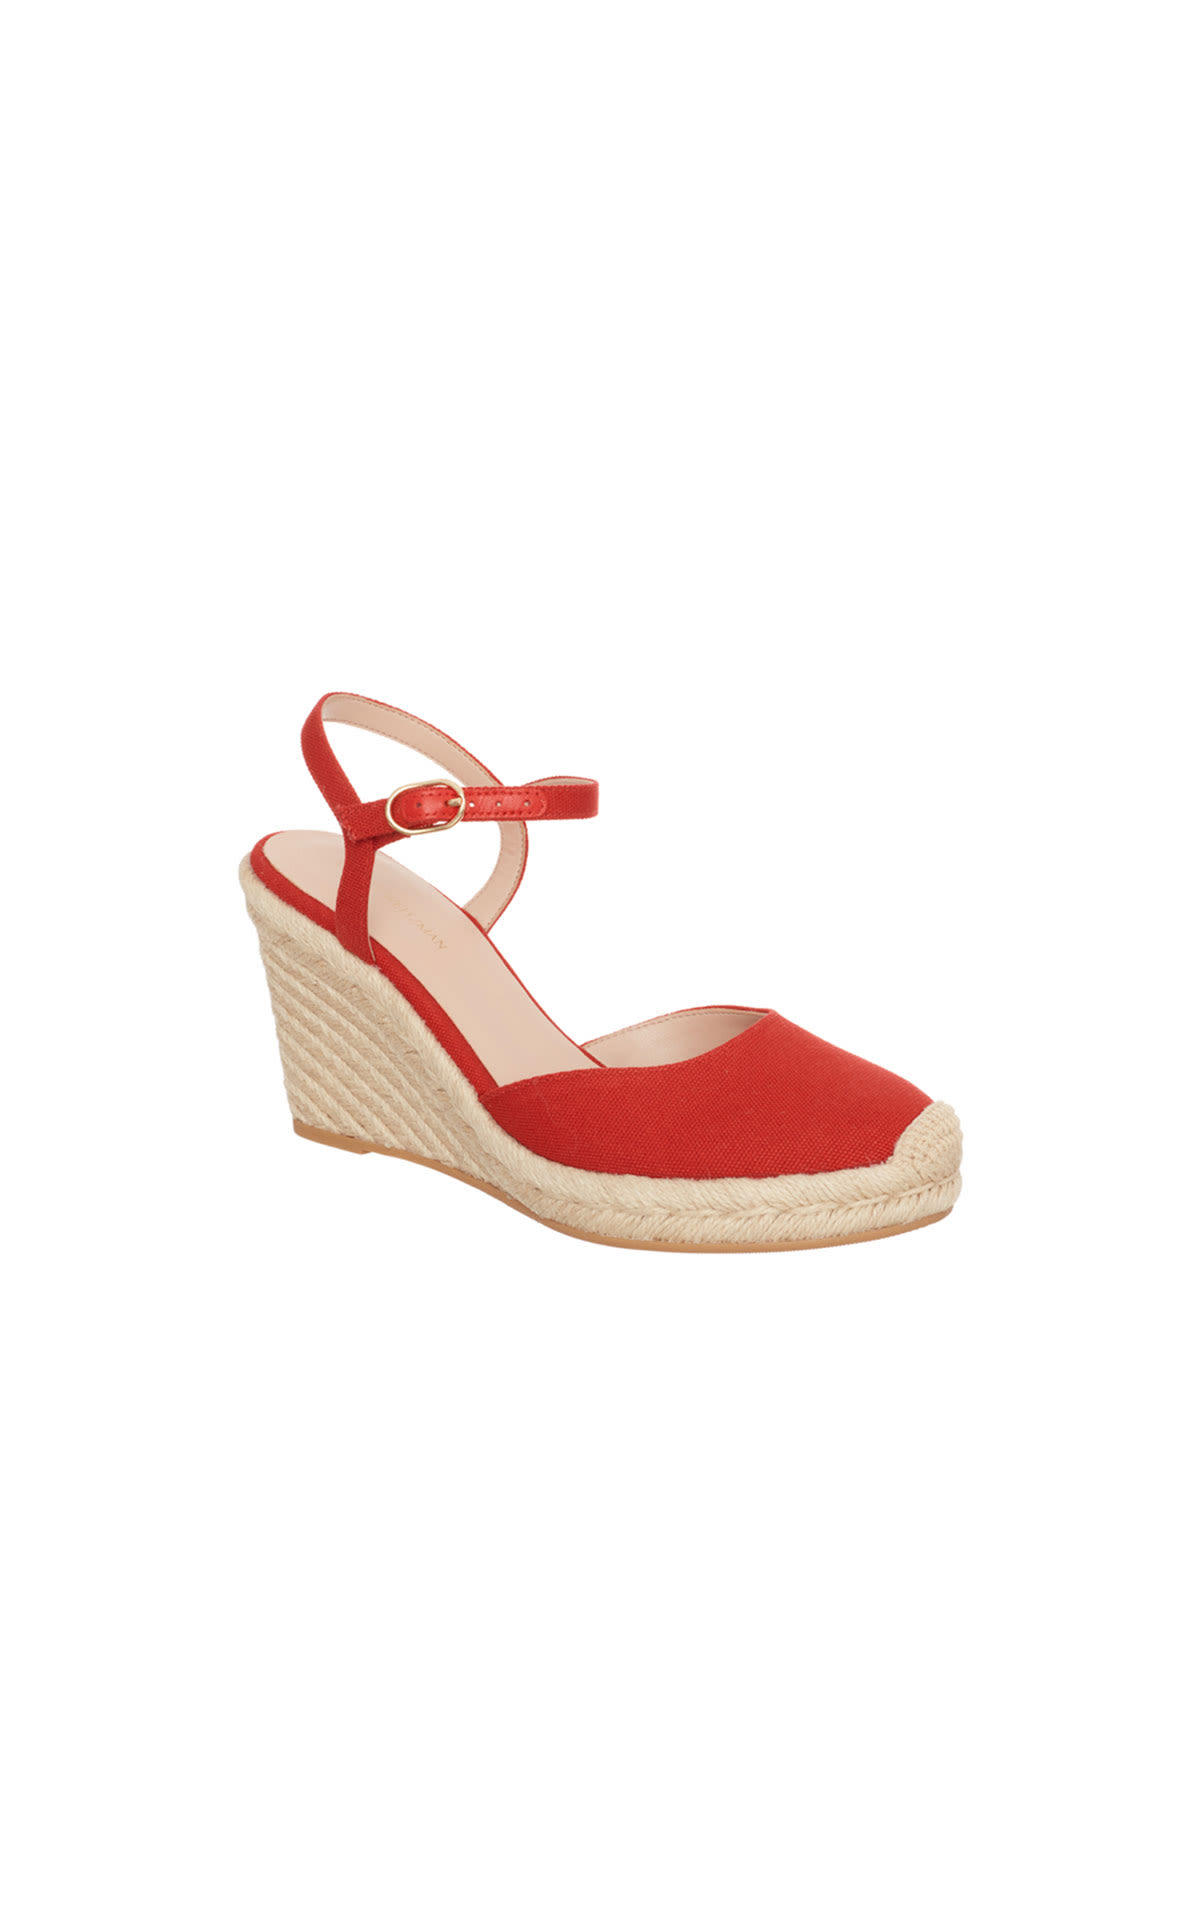 Stuart Weitzman Closed toe wedges from Bicester Village